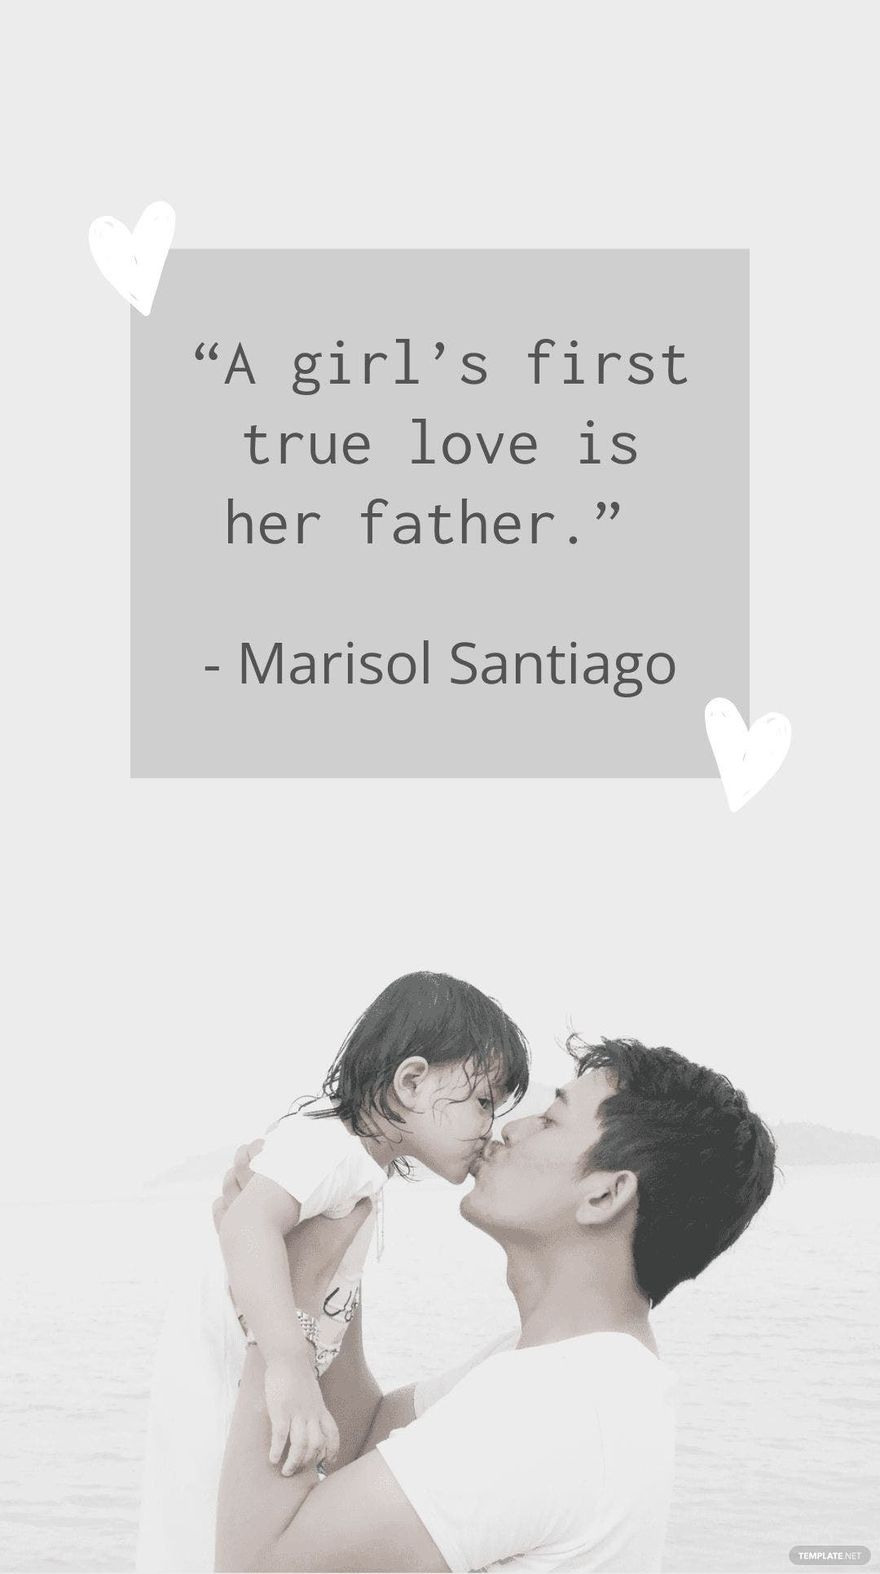 Free Marisol Santiago  - “A girl’s first true love is her father.” in JPG